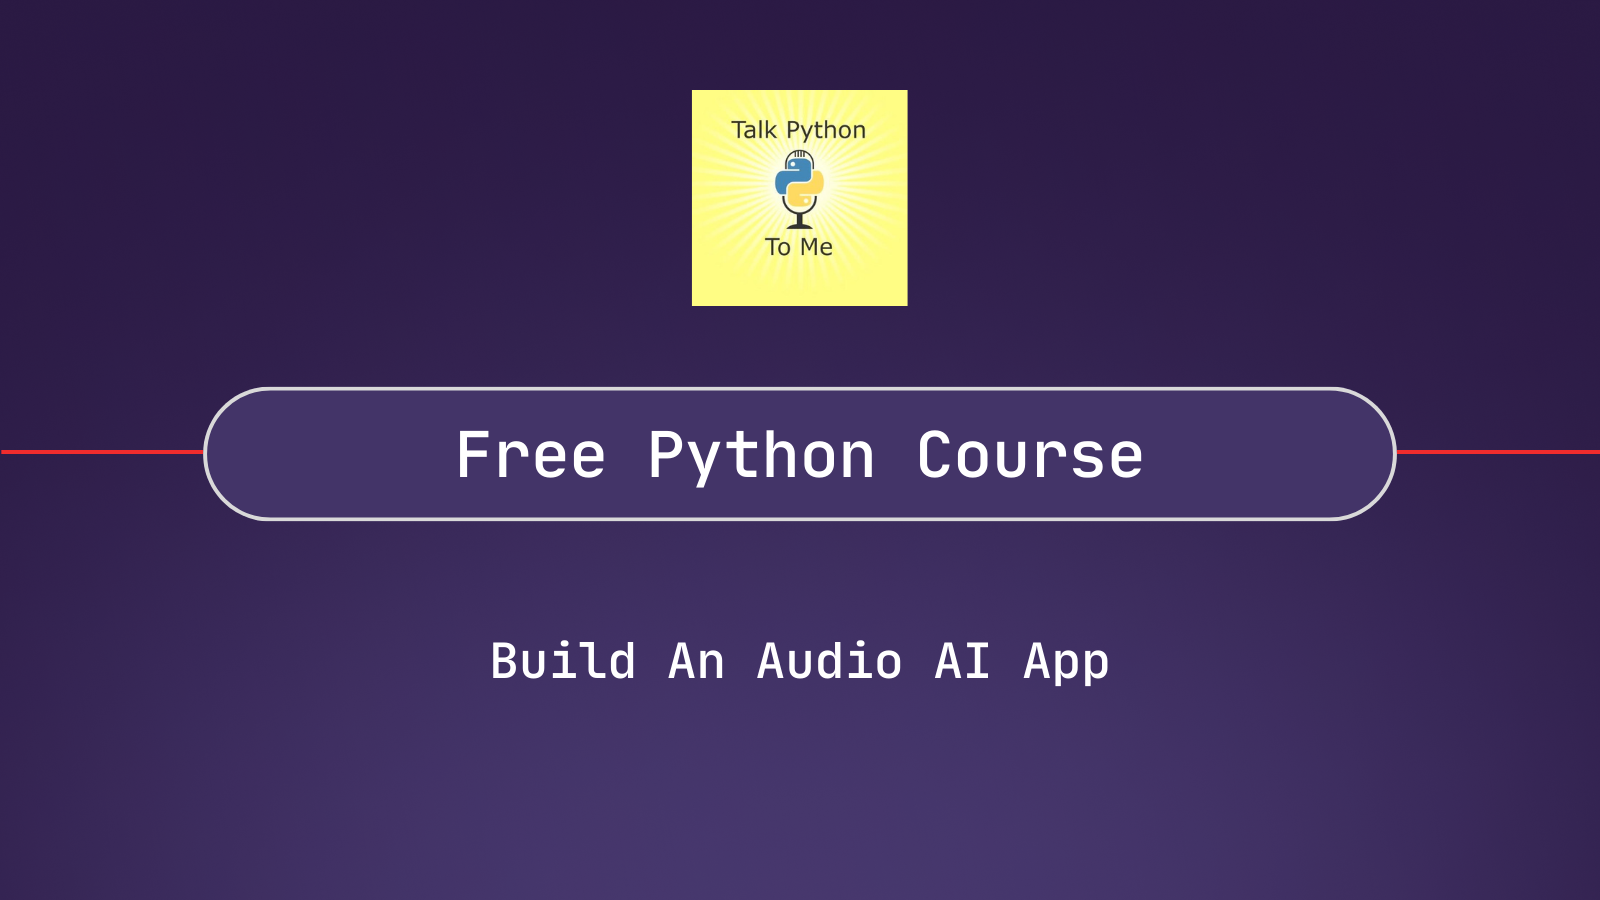 A New Free Python Course to Build Real-World Audio AI Apps